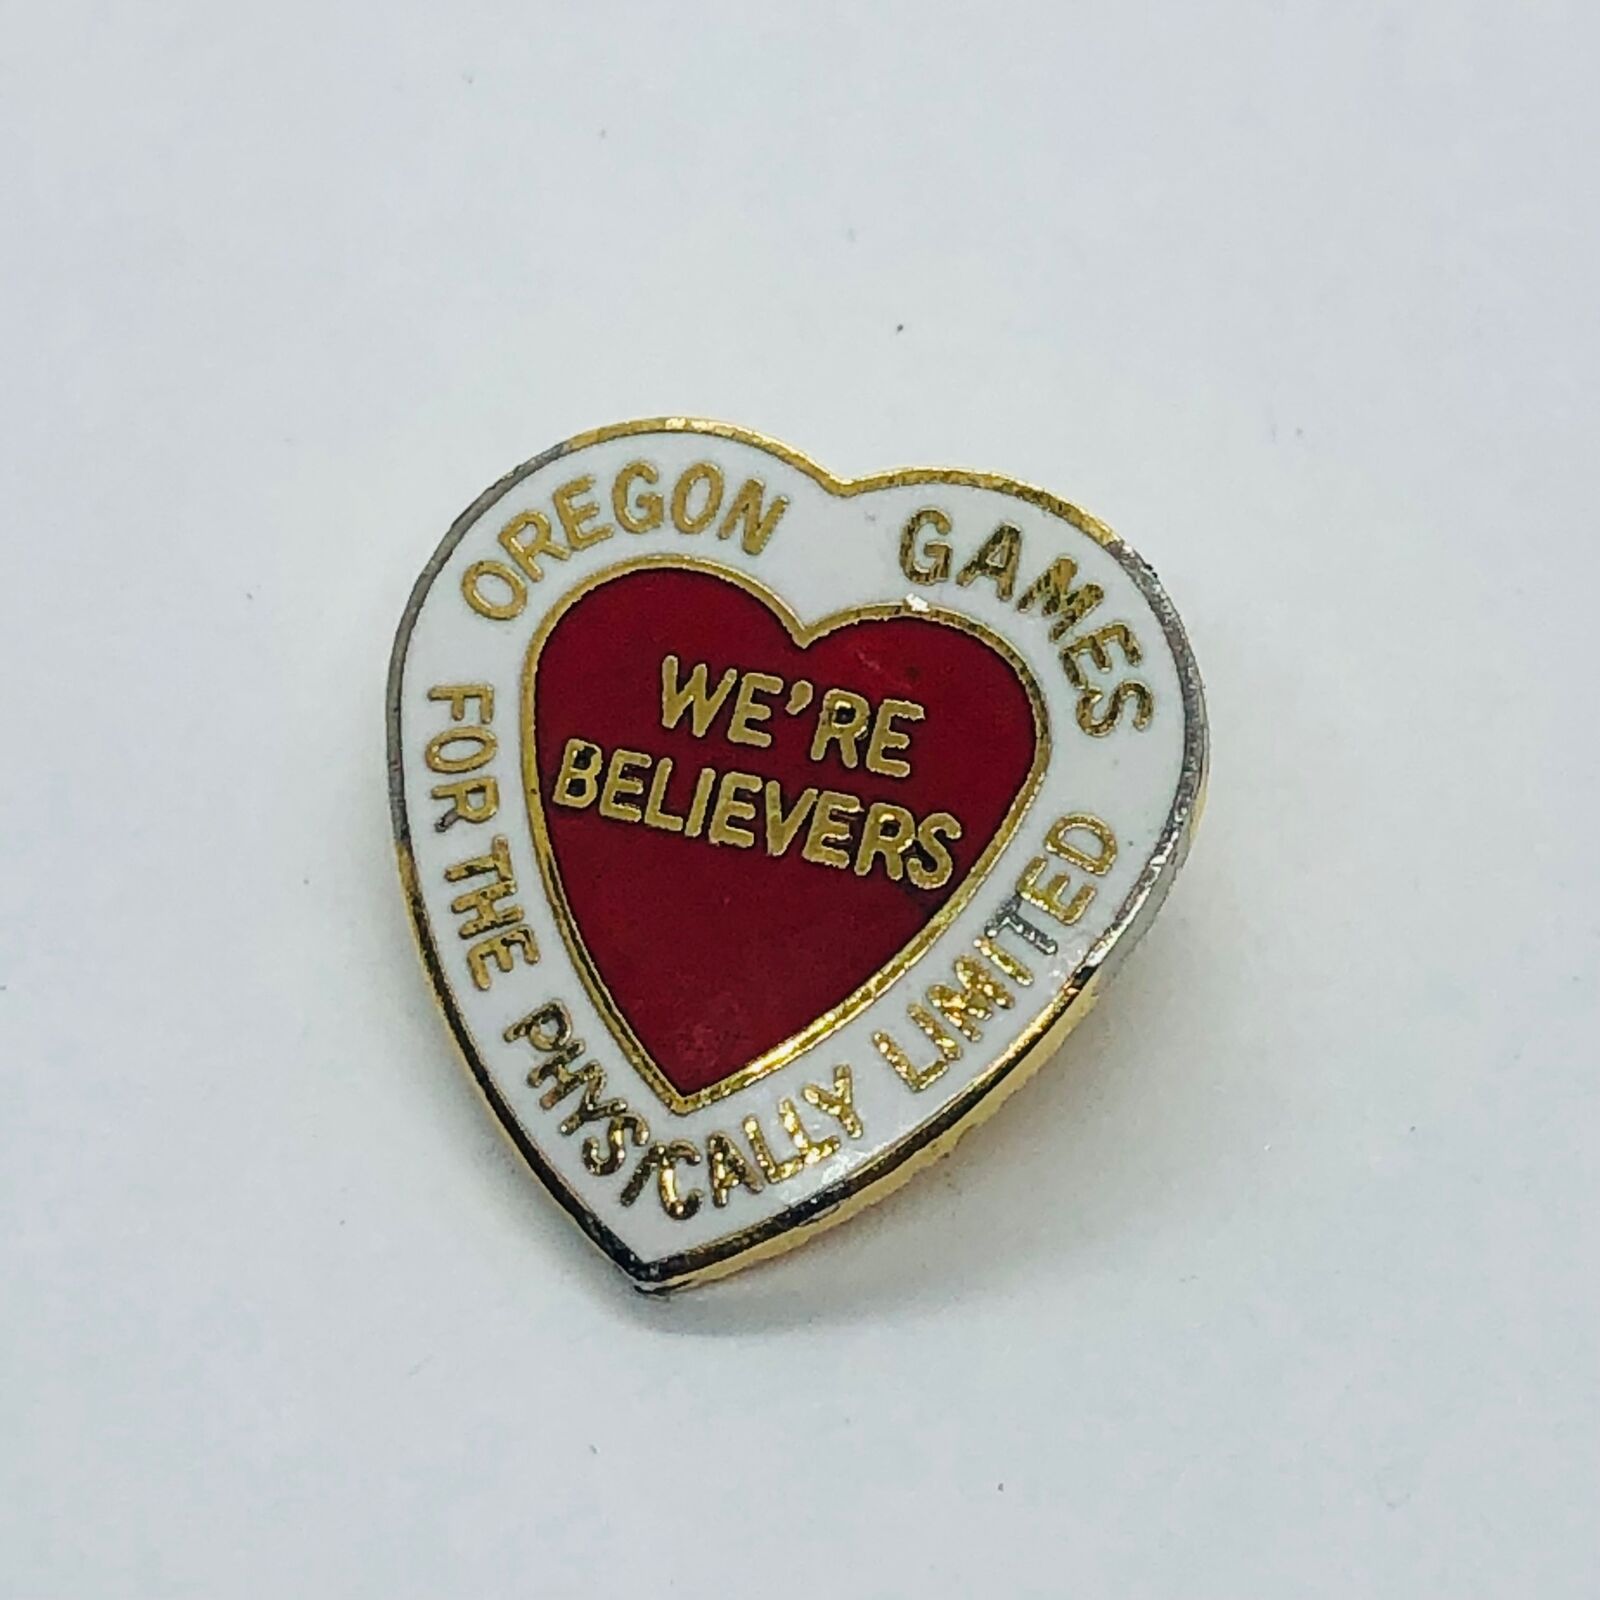 Vtg Oregon Games for Physically Limited Disabled Heart Lapel Pin Brooch